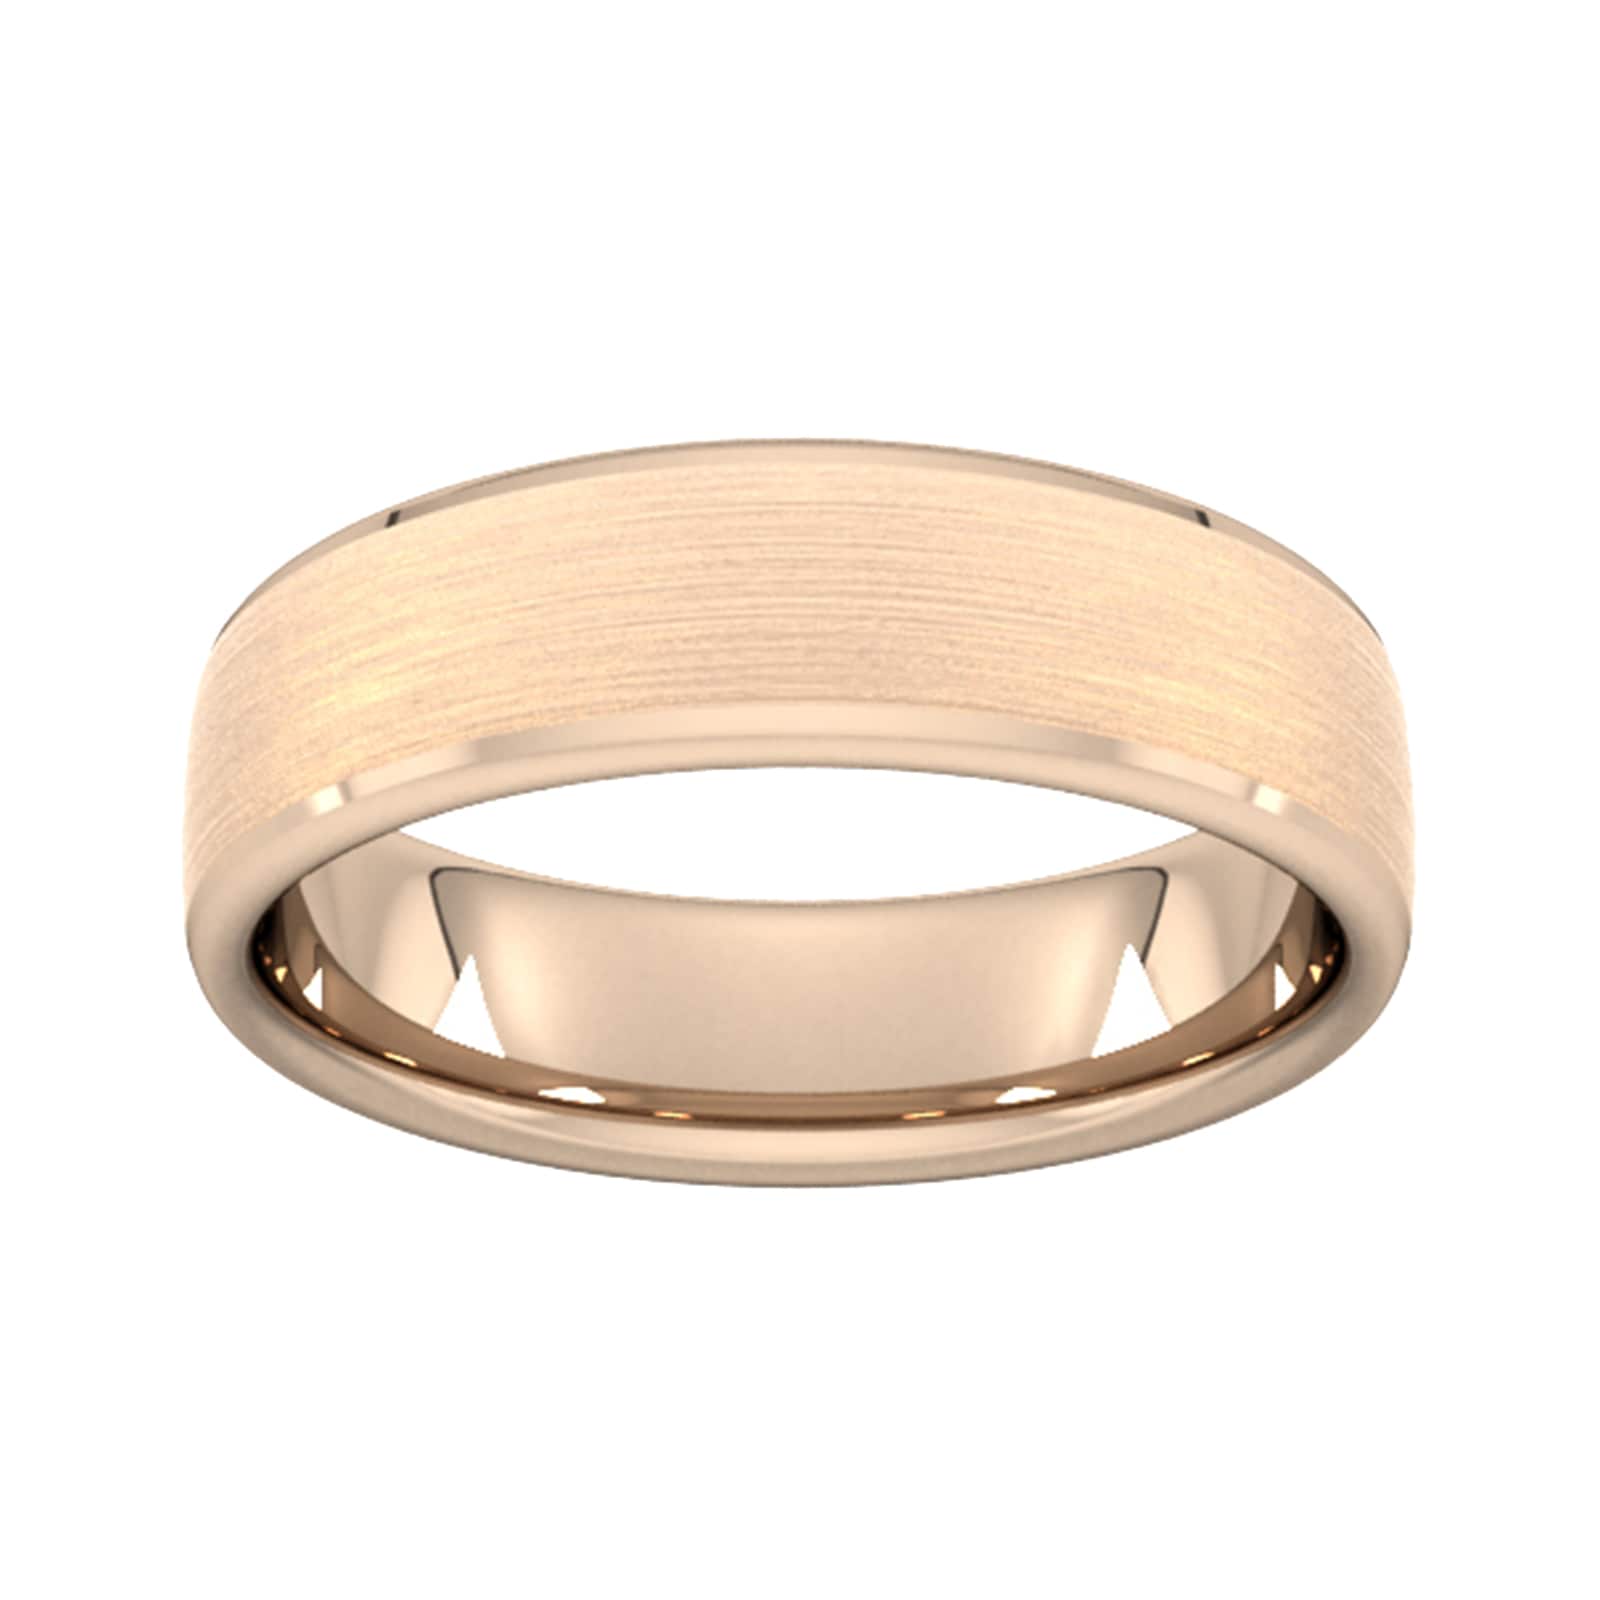 6mm Flat Court Heavy Polished Chamfered Edges With Matt Centre Wedding Ring In 18 Carat Rose Gold - Ring Size V